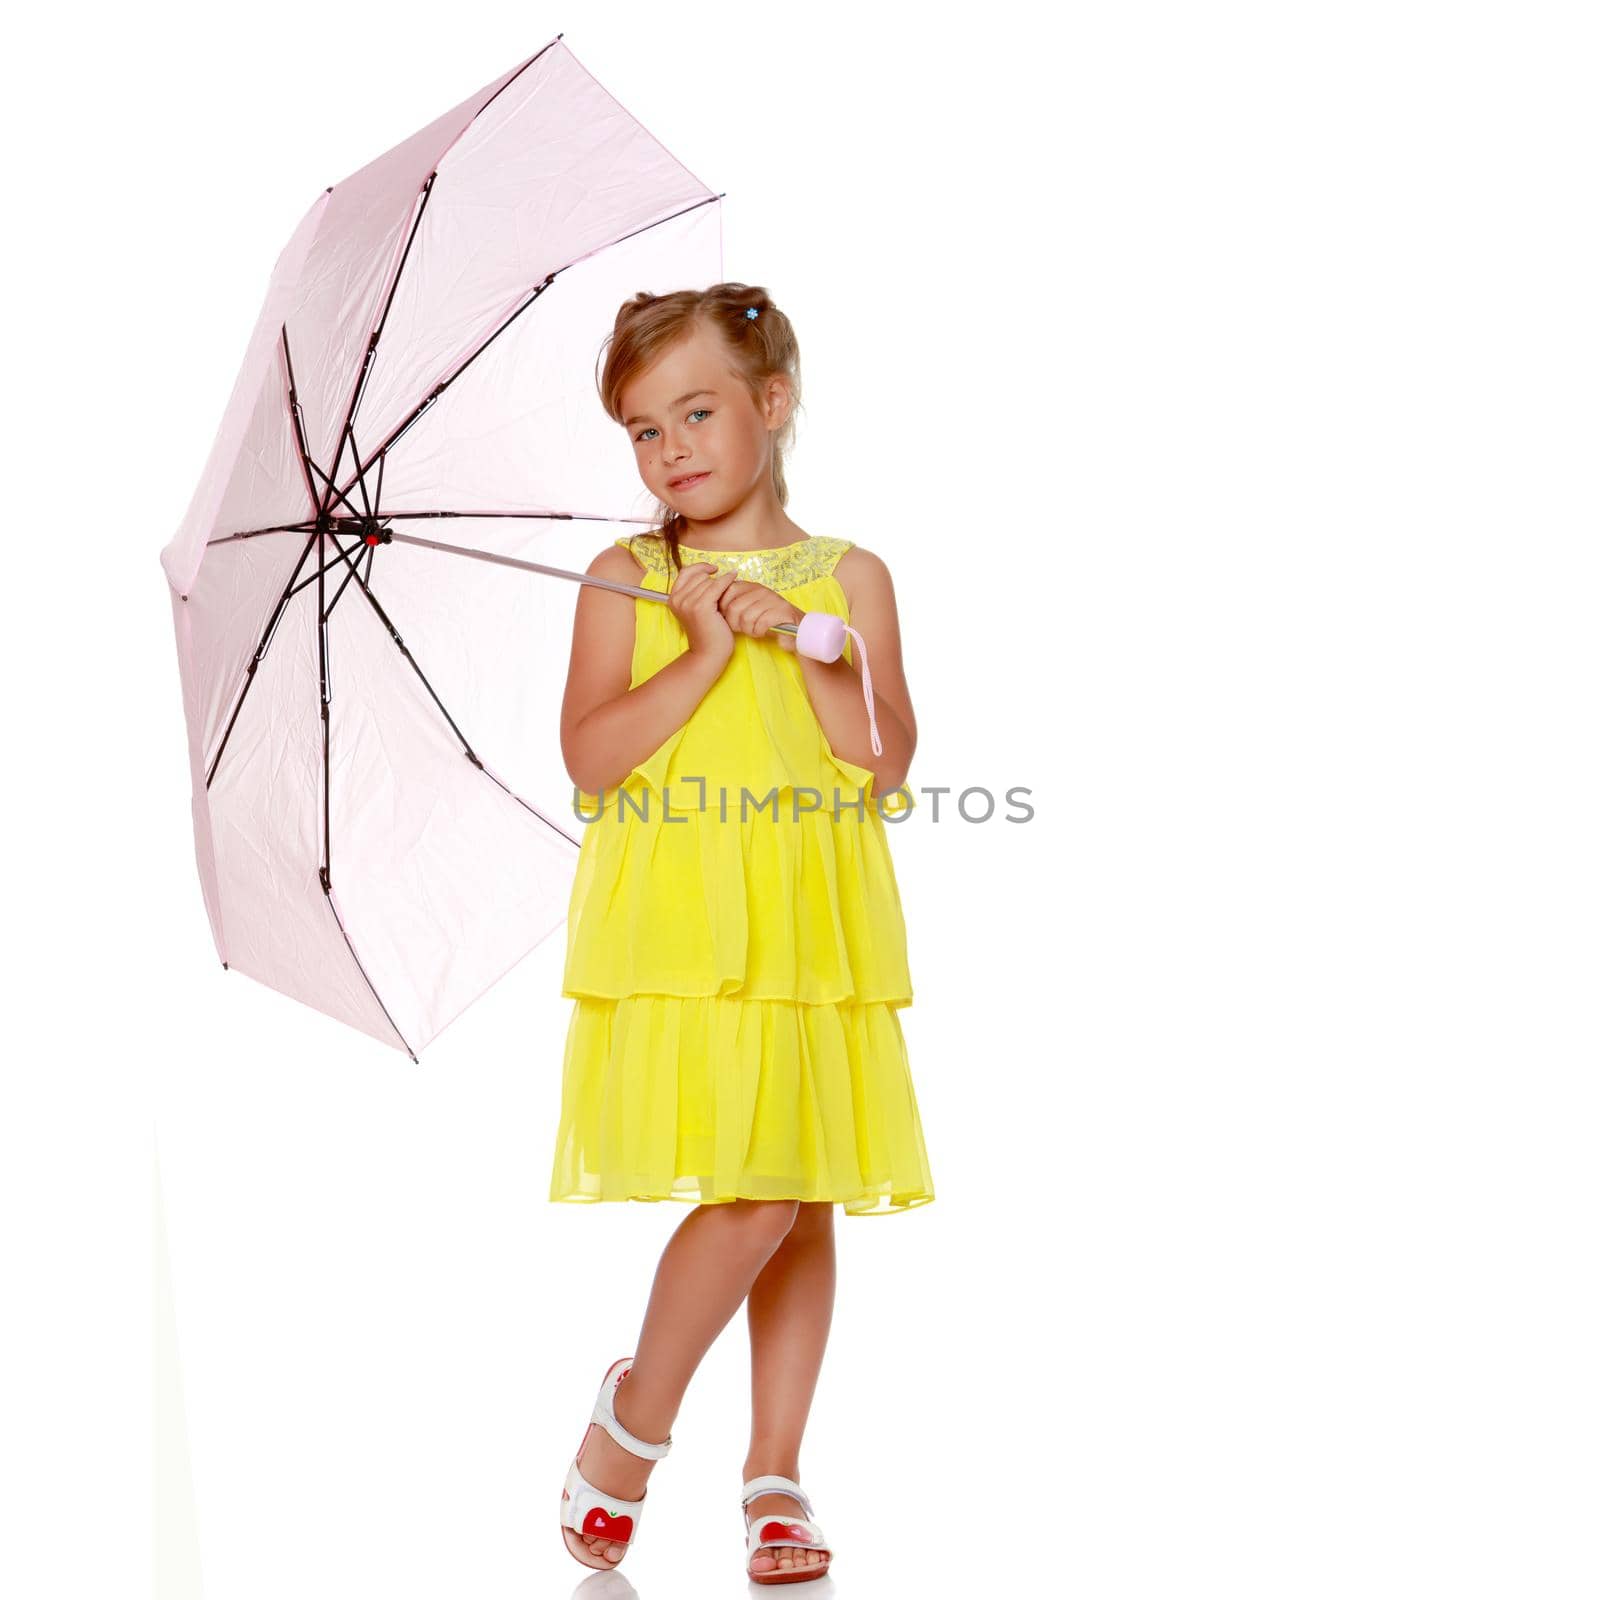 The little girl is full-length. The concept of family happiness, a child, childhood, play, beauty and fashion. isolated on white background